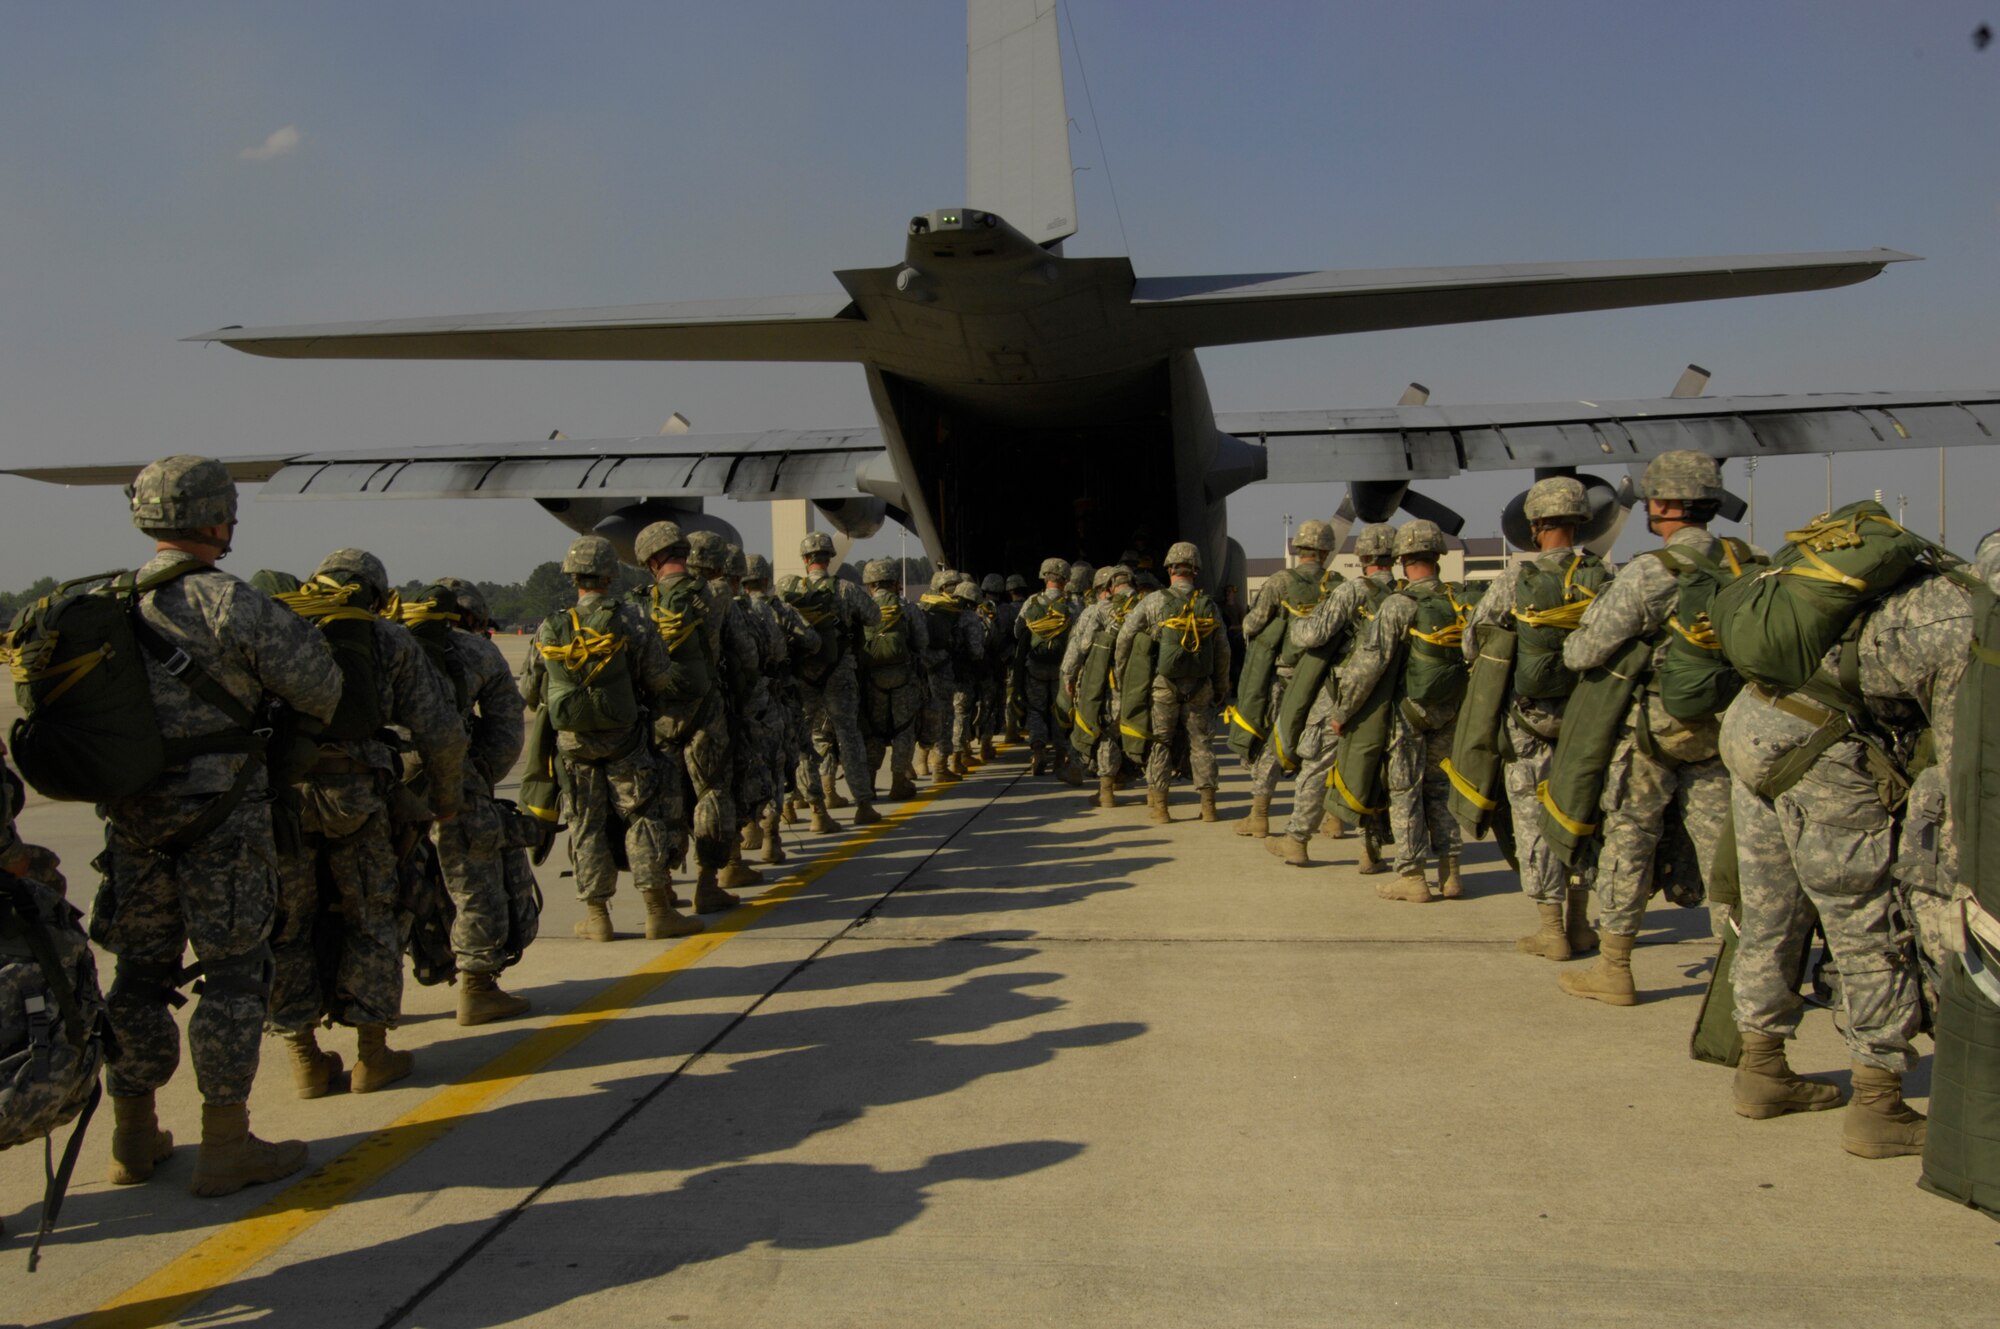 U.S. Army paratroopers board a U.S. Air Force C-130 Hercules during Joint Forcible Entry Exercise at Pope Air Force Base, N.C., on June 17, 2008. JFEX is a joint airdrop exercise designed to enhance service cohesiveness between U.S. Army and Air Force personnel, allowing both services an opportunity to properly execute large-scale heavy equipment and troop movement. (U.S. Air Force photo by Senior Airman Ali E. Flisek) 